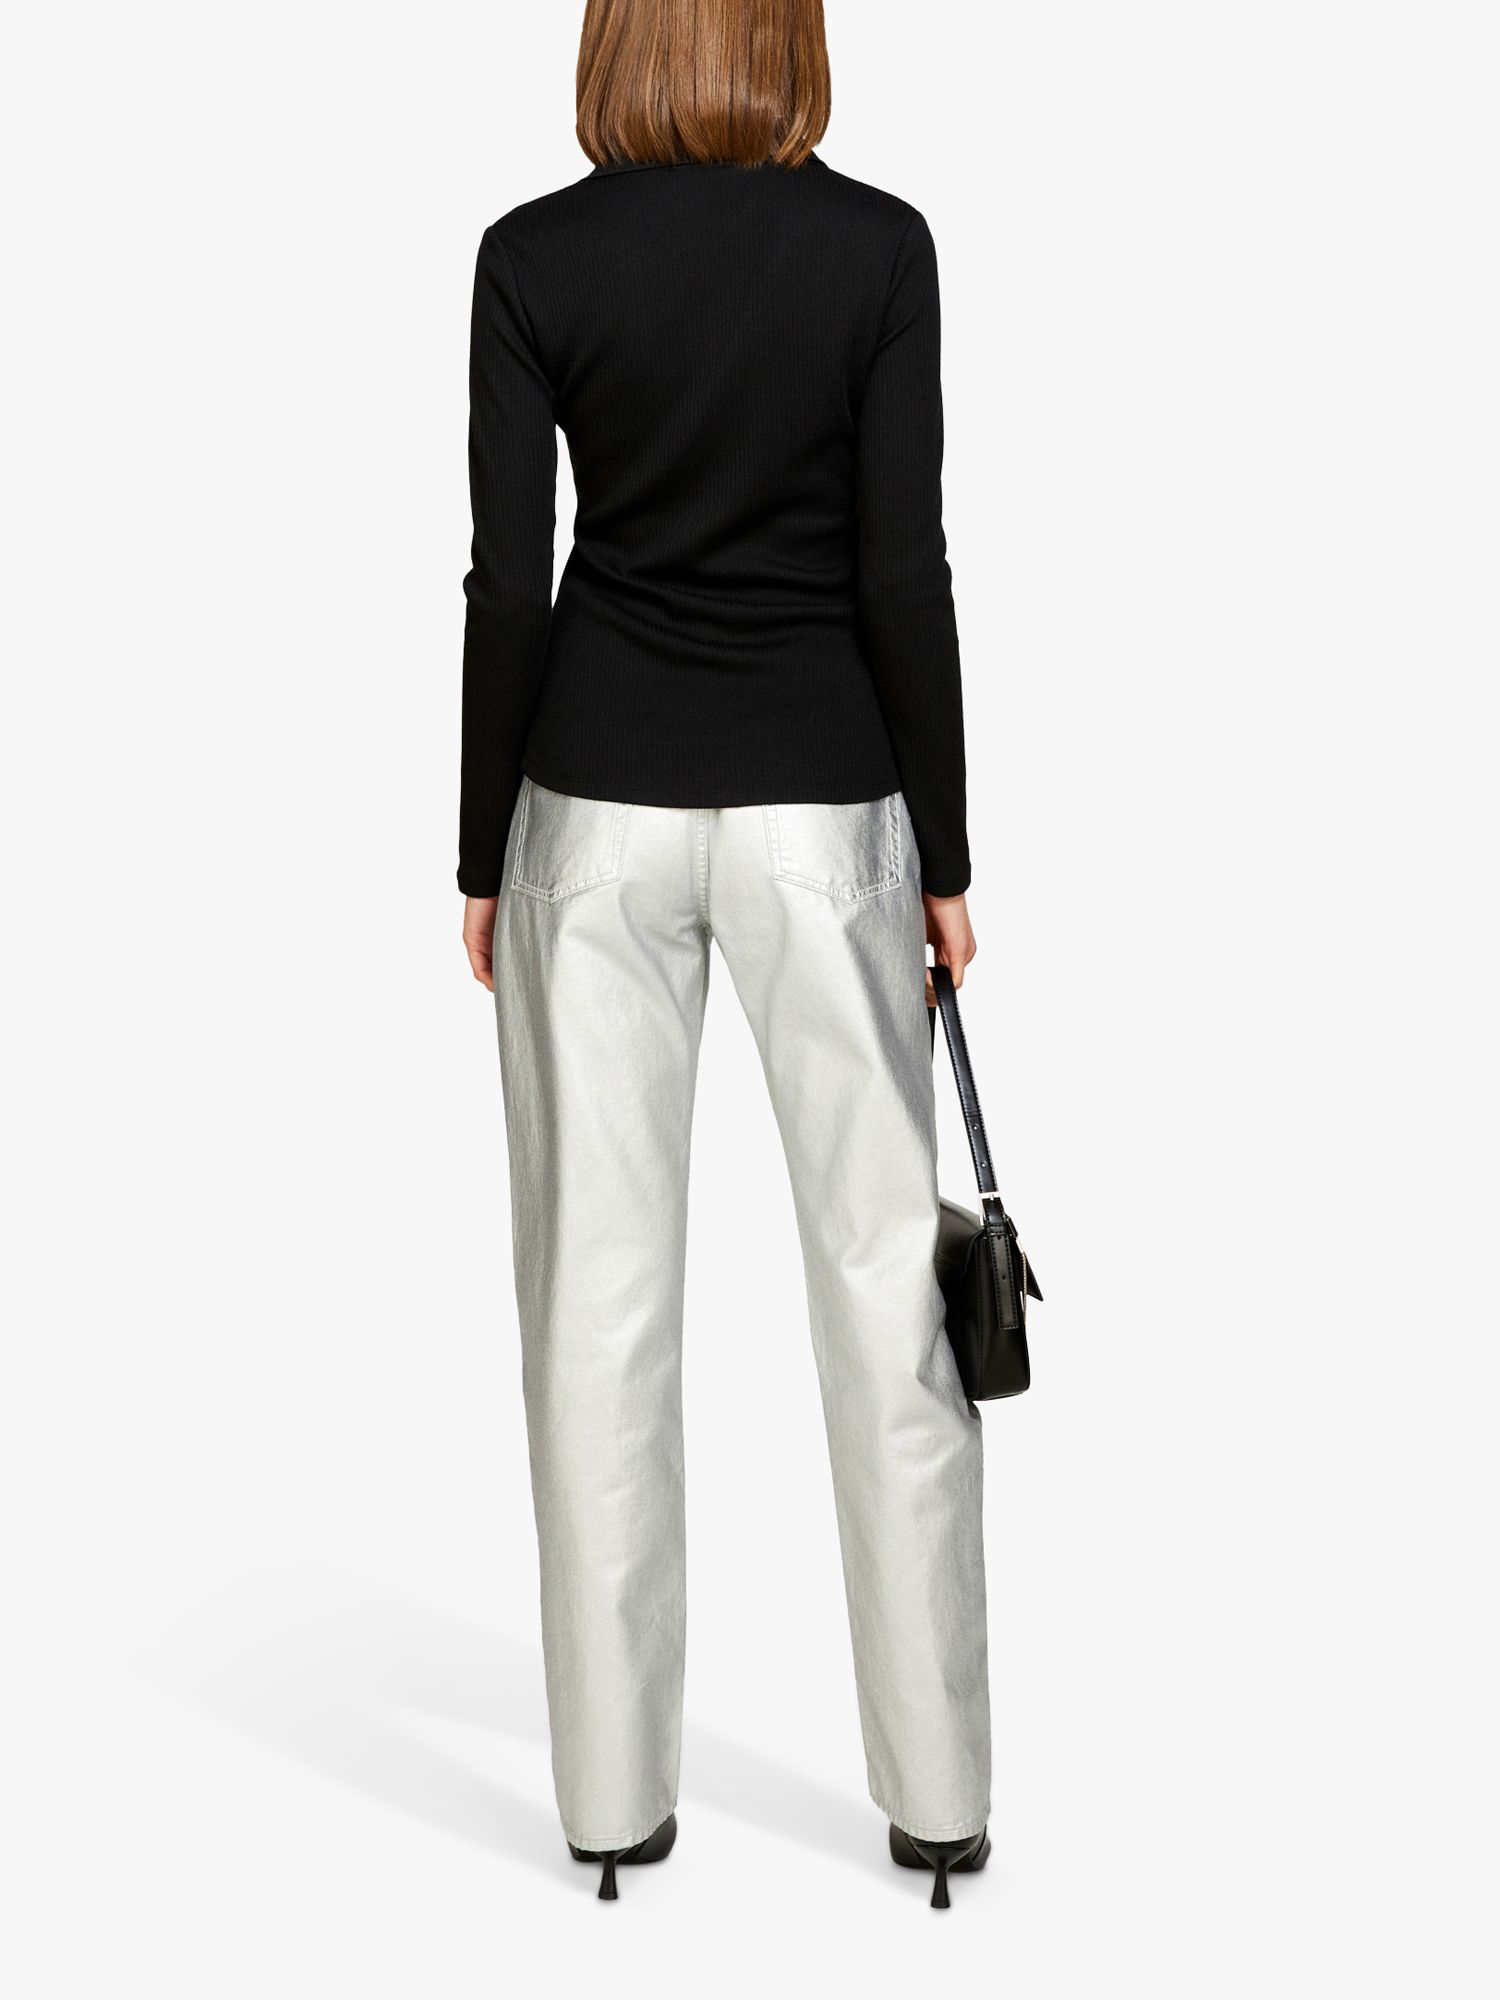 Buy SISLEY Ribbed Button Through Collared Top, Black Online at johnlewis.com